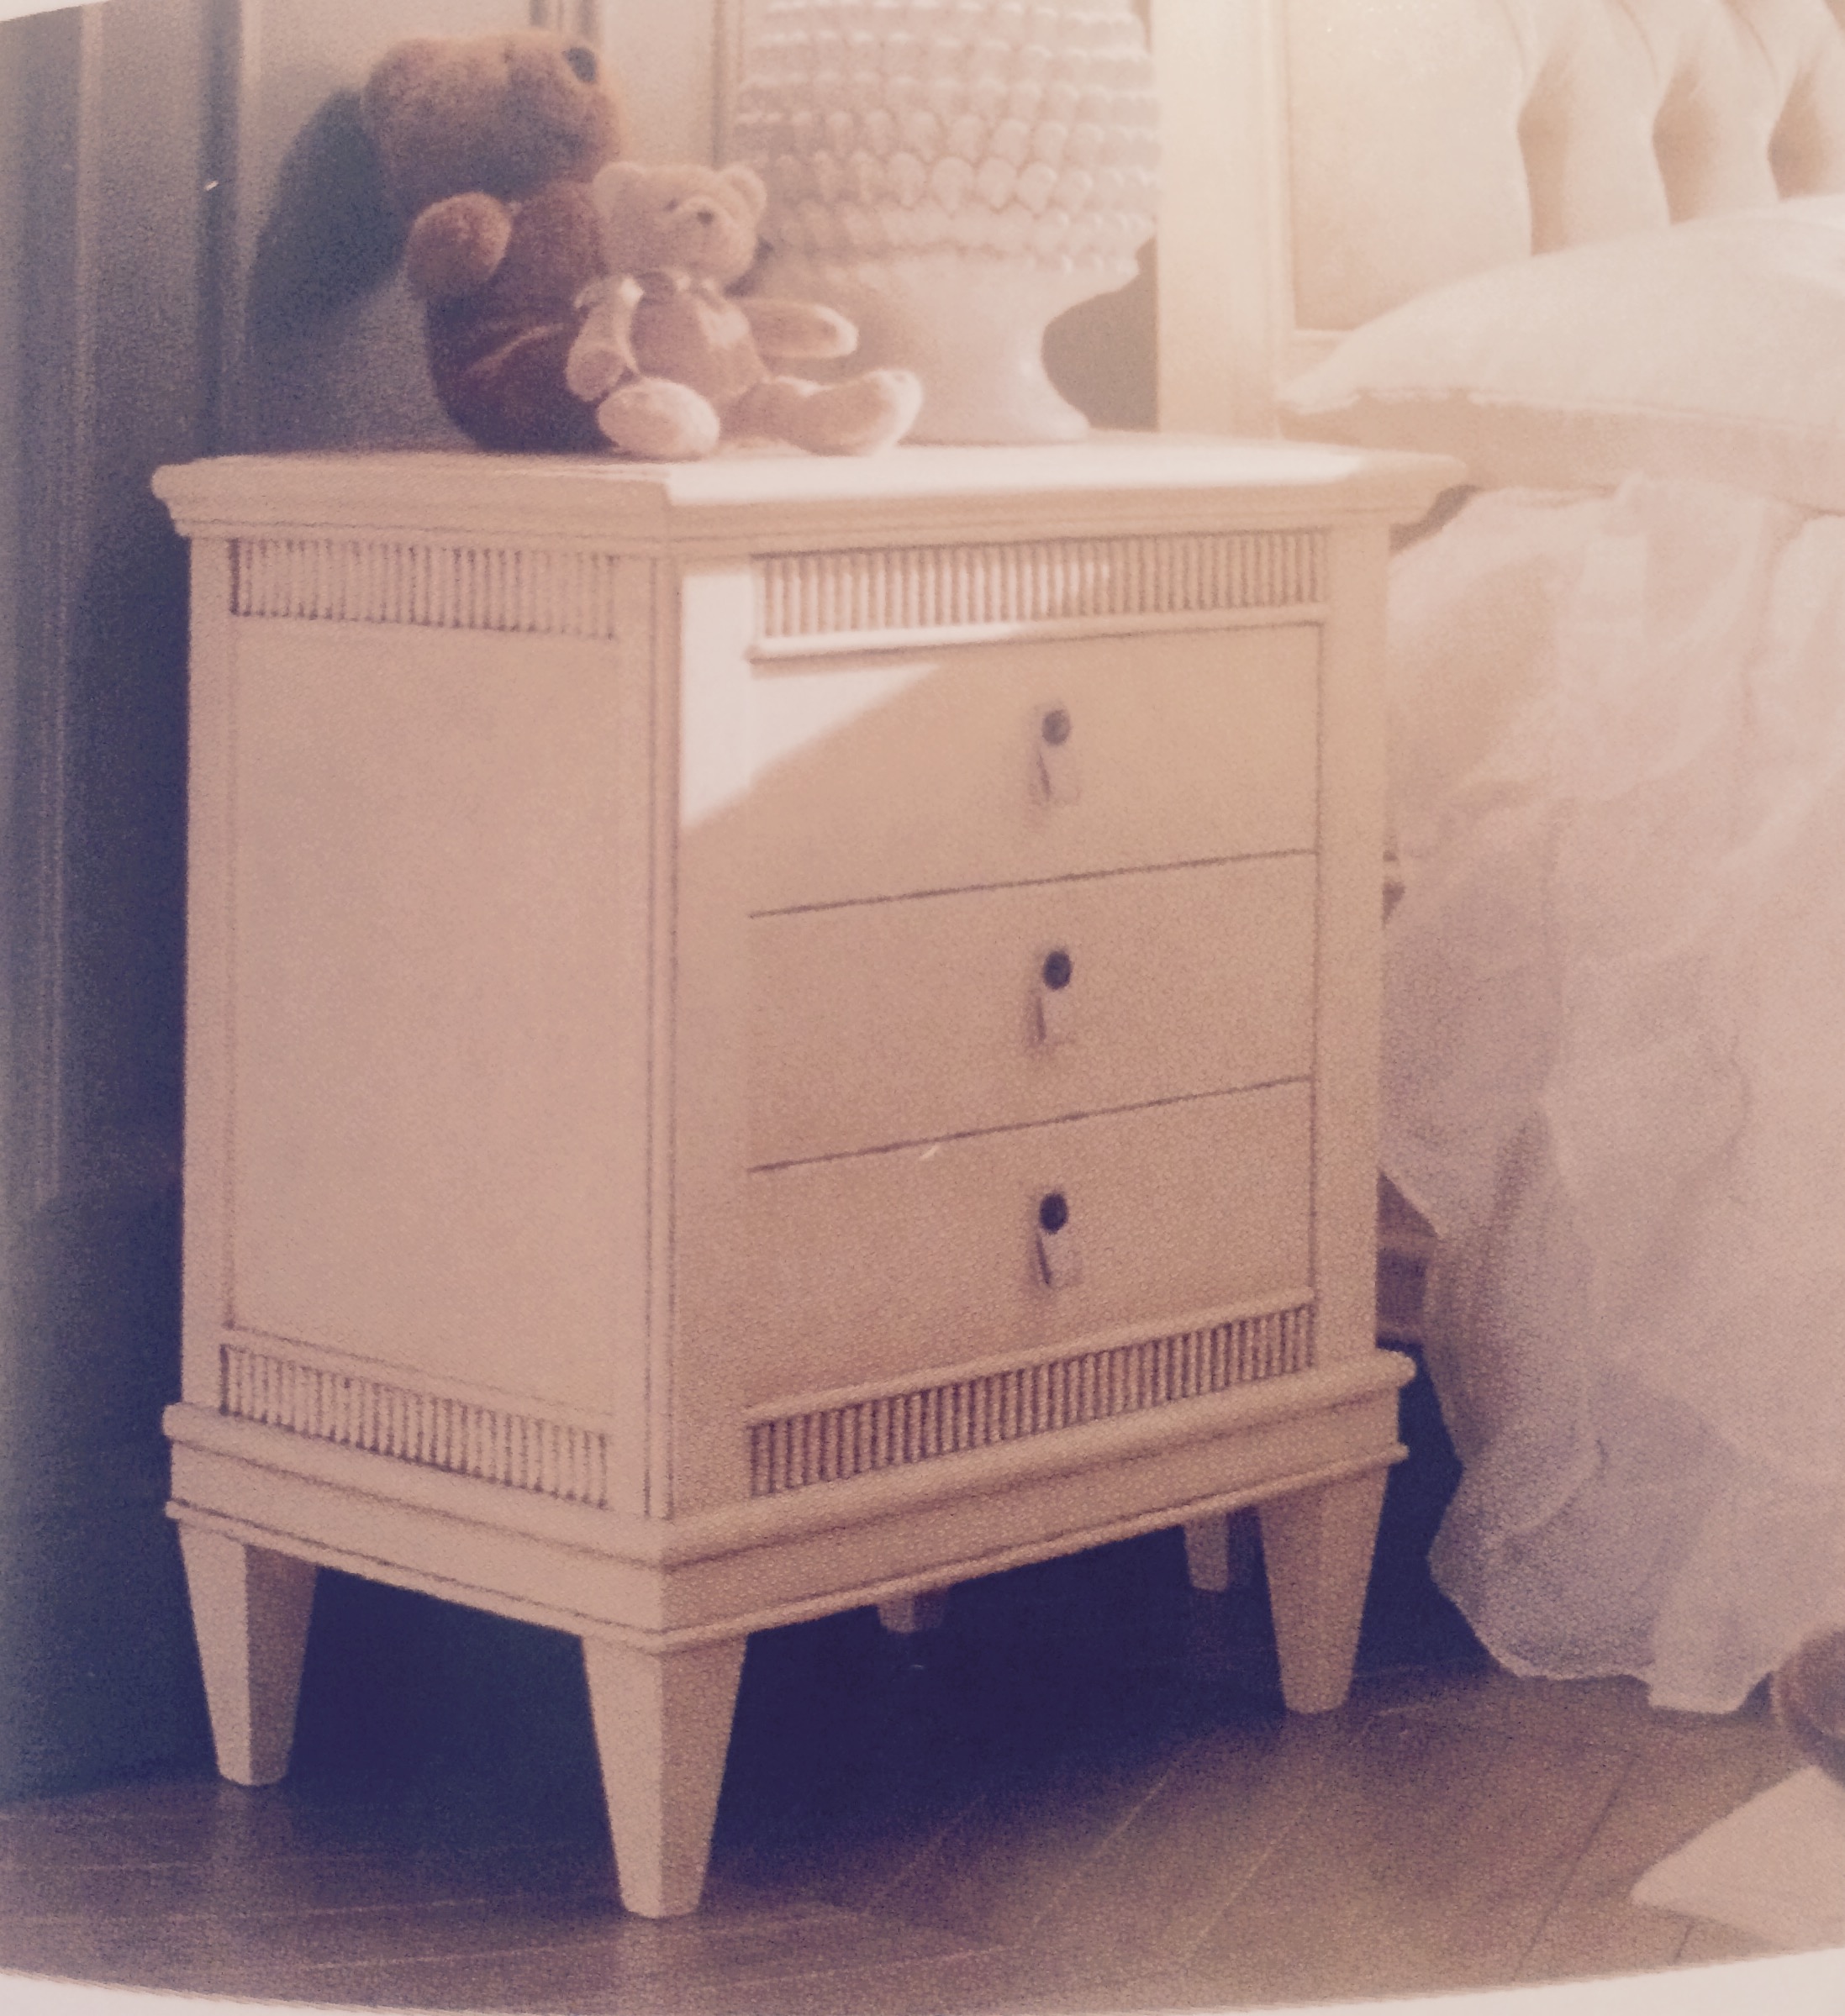 34.19-20/L 3-DRAWER BEDSIDE TABLE WITH SOFT-CLOSE